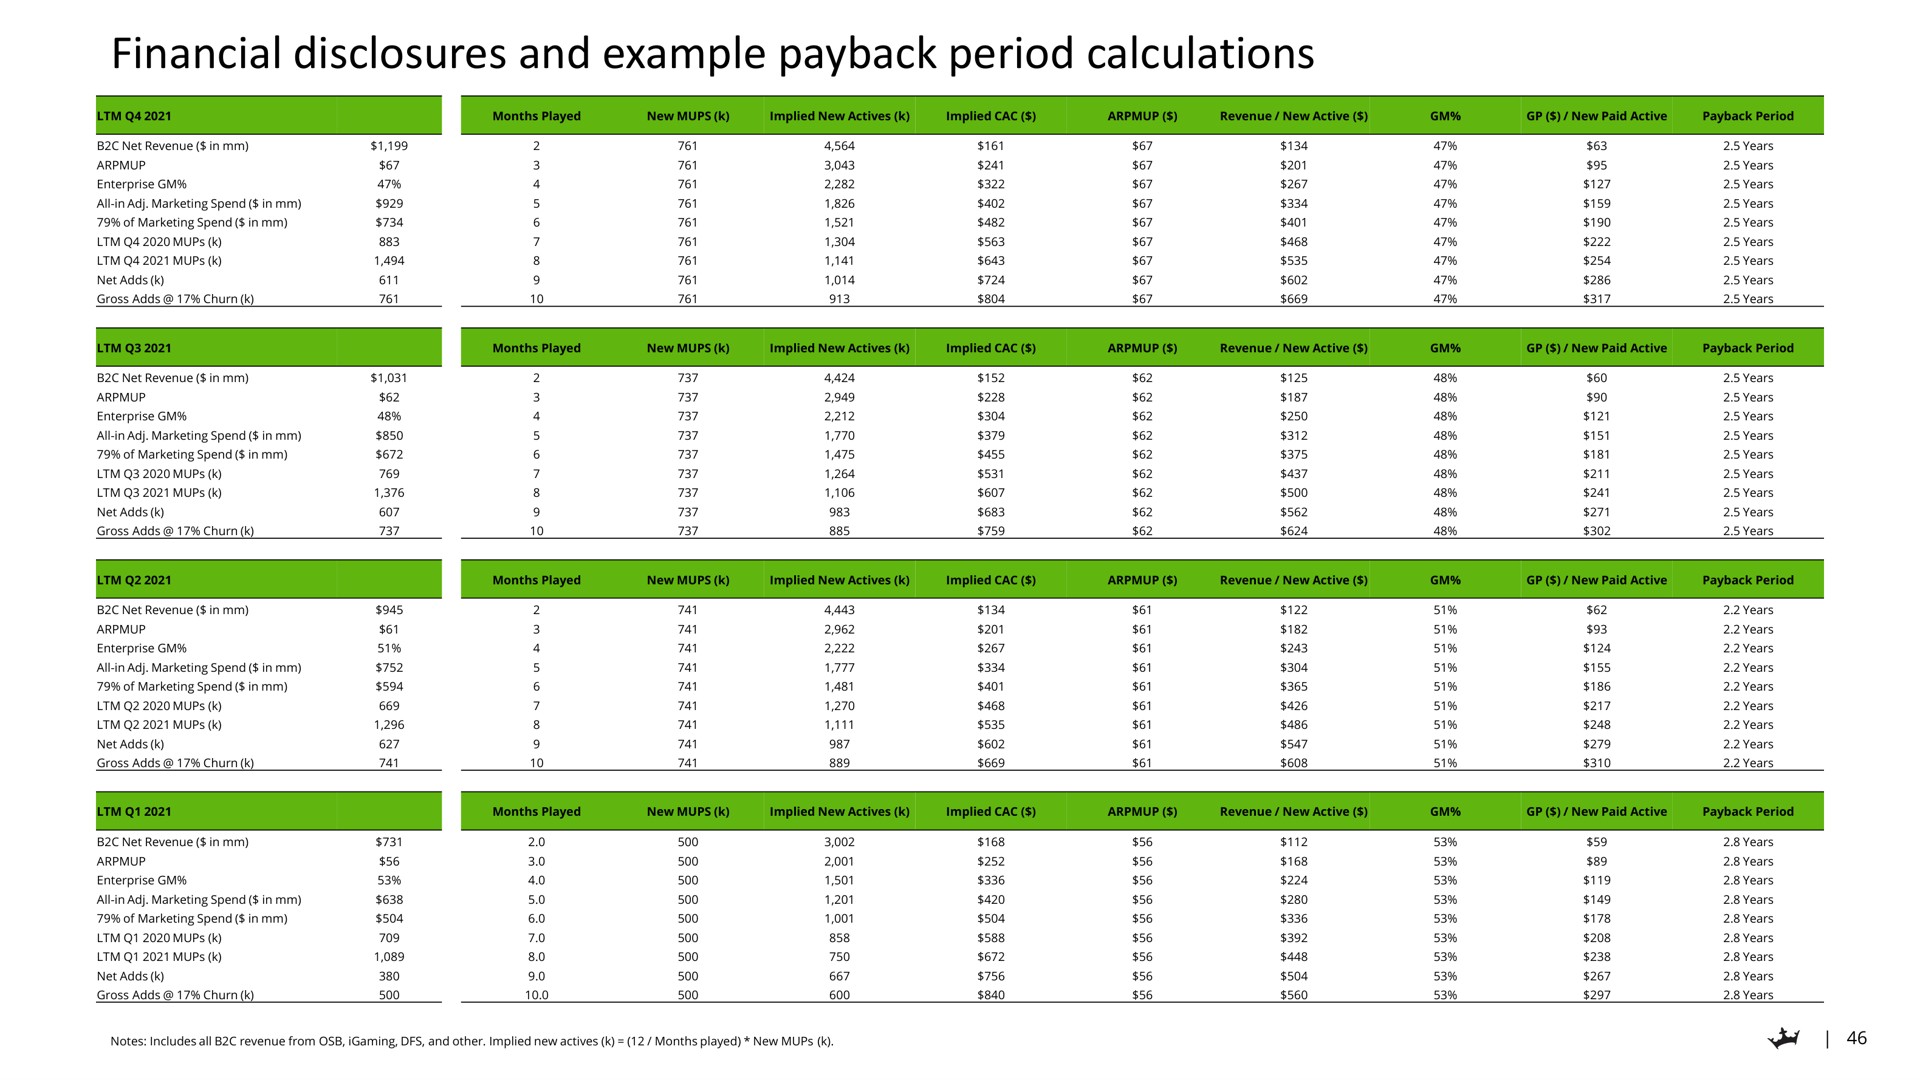 financial disclosures and example period calculations | DraftKings